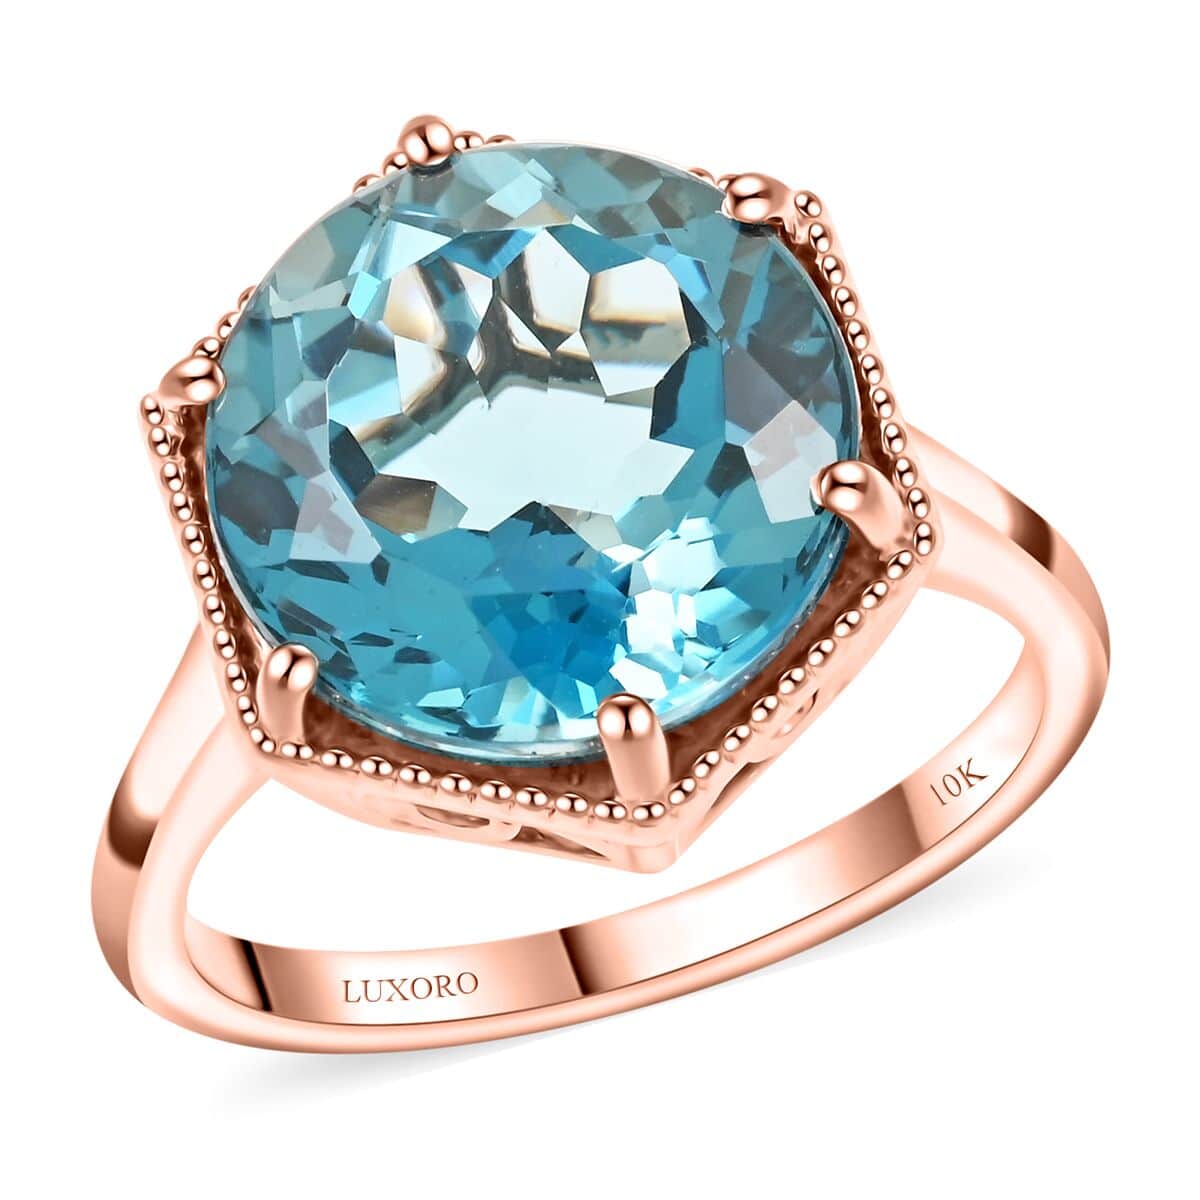 Certified and Appraised Luxoro 10K White Gold AAA London Blue Topaz Solitaire Ring 4.30 Grams 8.50 ctw image number 0